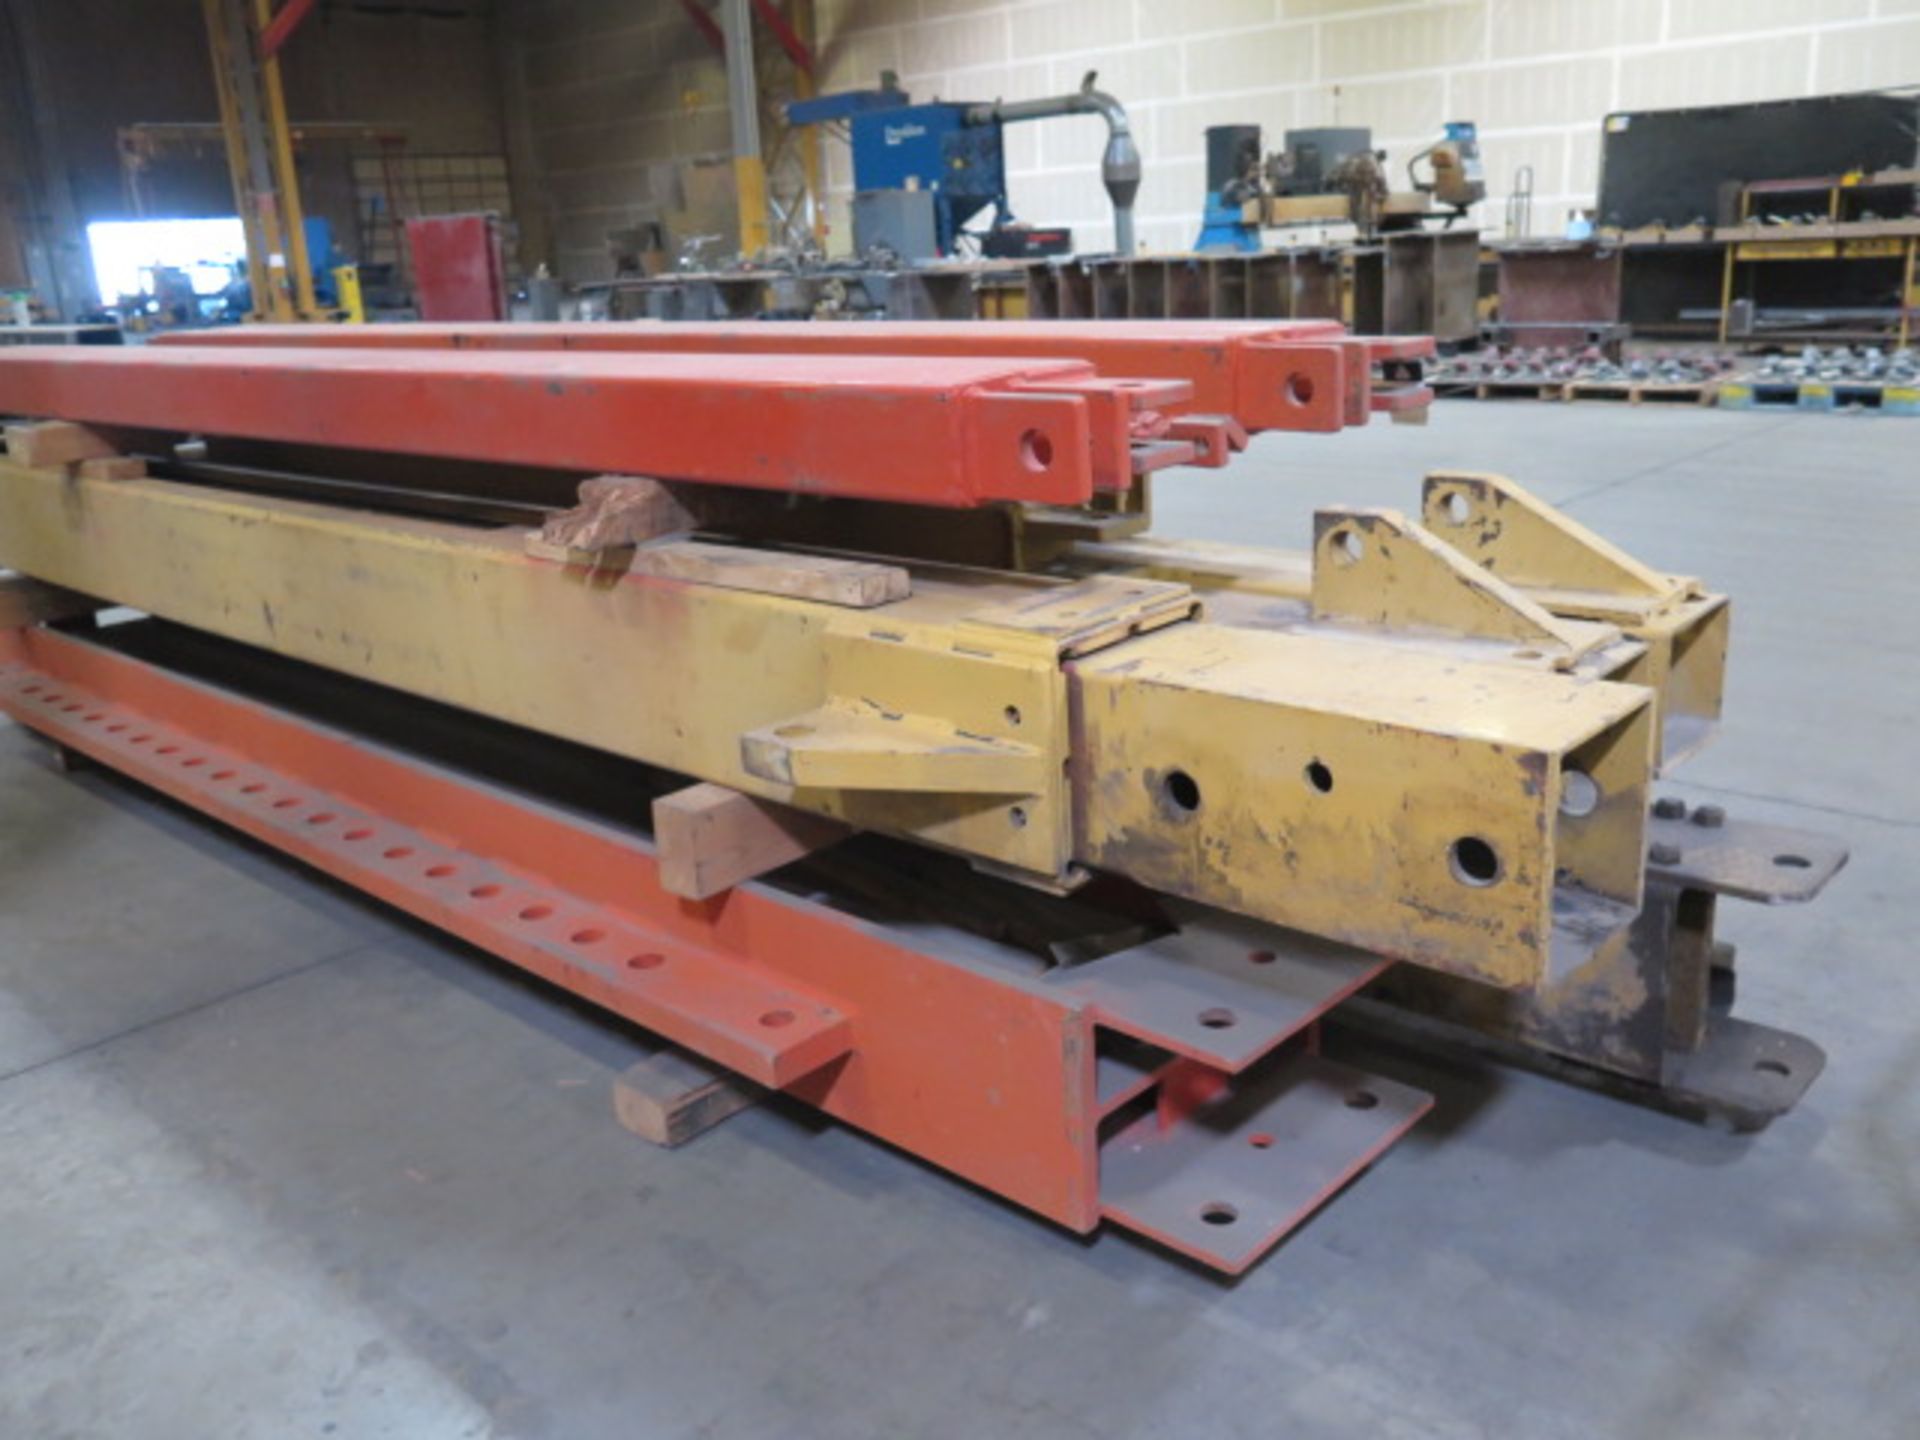 50 Ton Hydraulic Gantry Machinery Lift (SOLD AS-IS - NO WATRRANTY) - Image 11 of 20